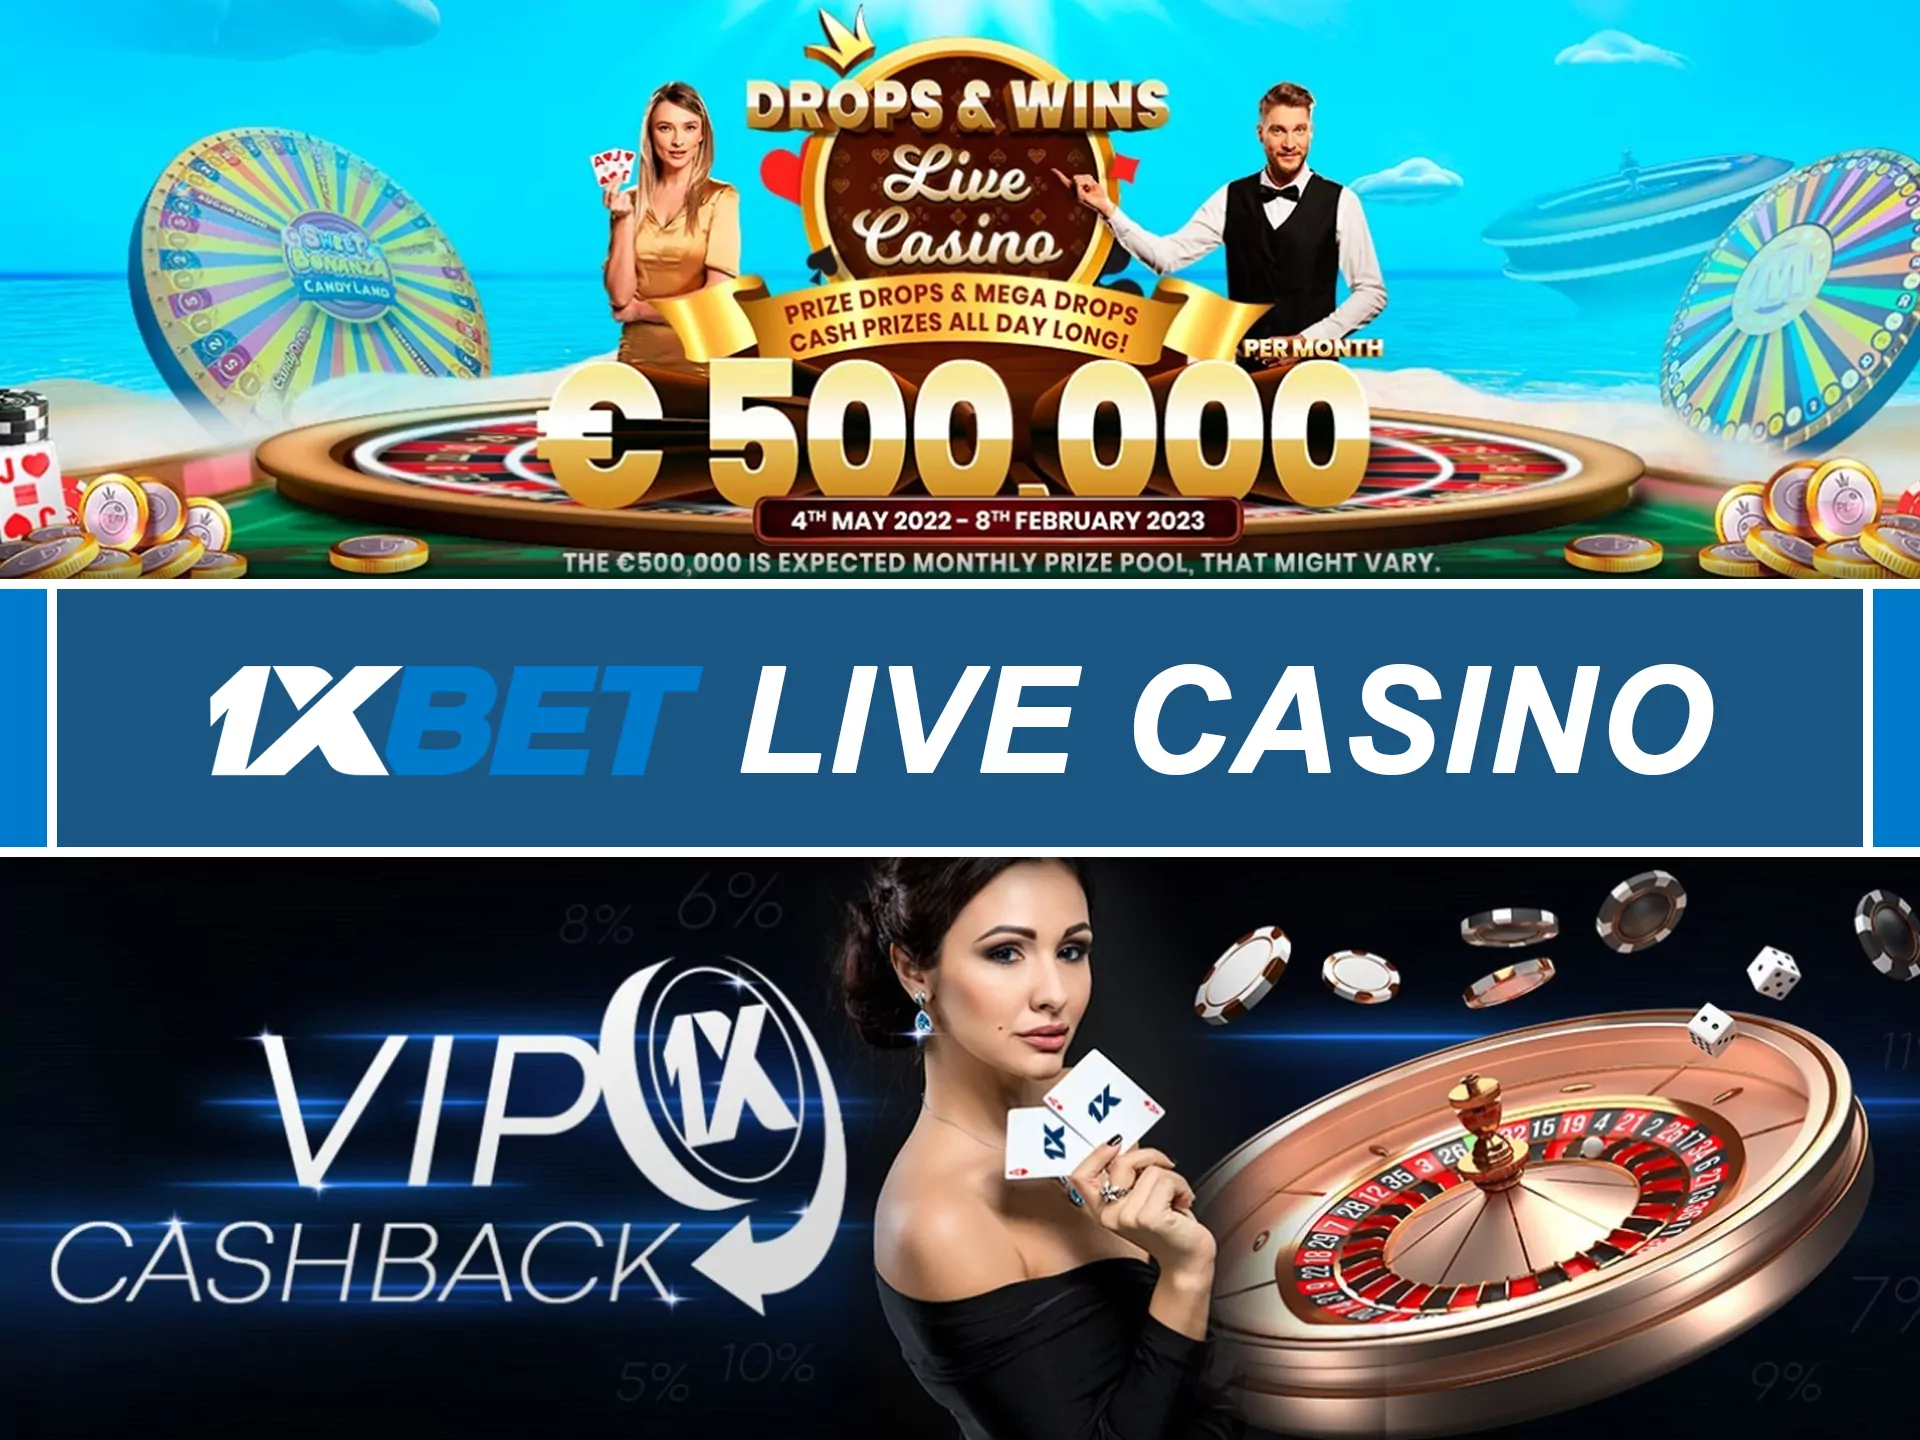 Play different games at 1xbet live casino.